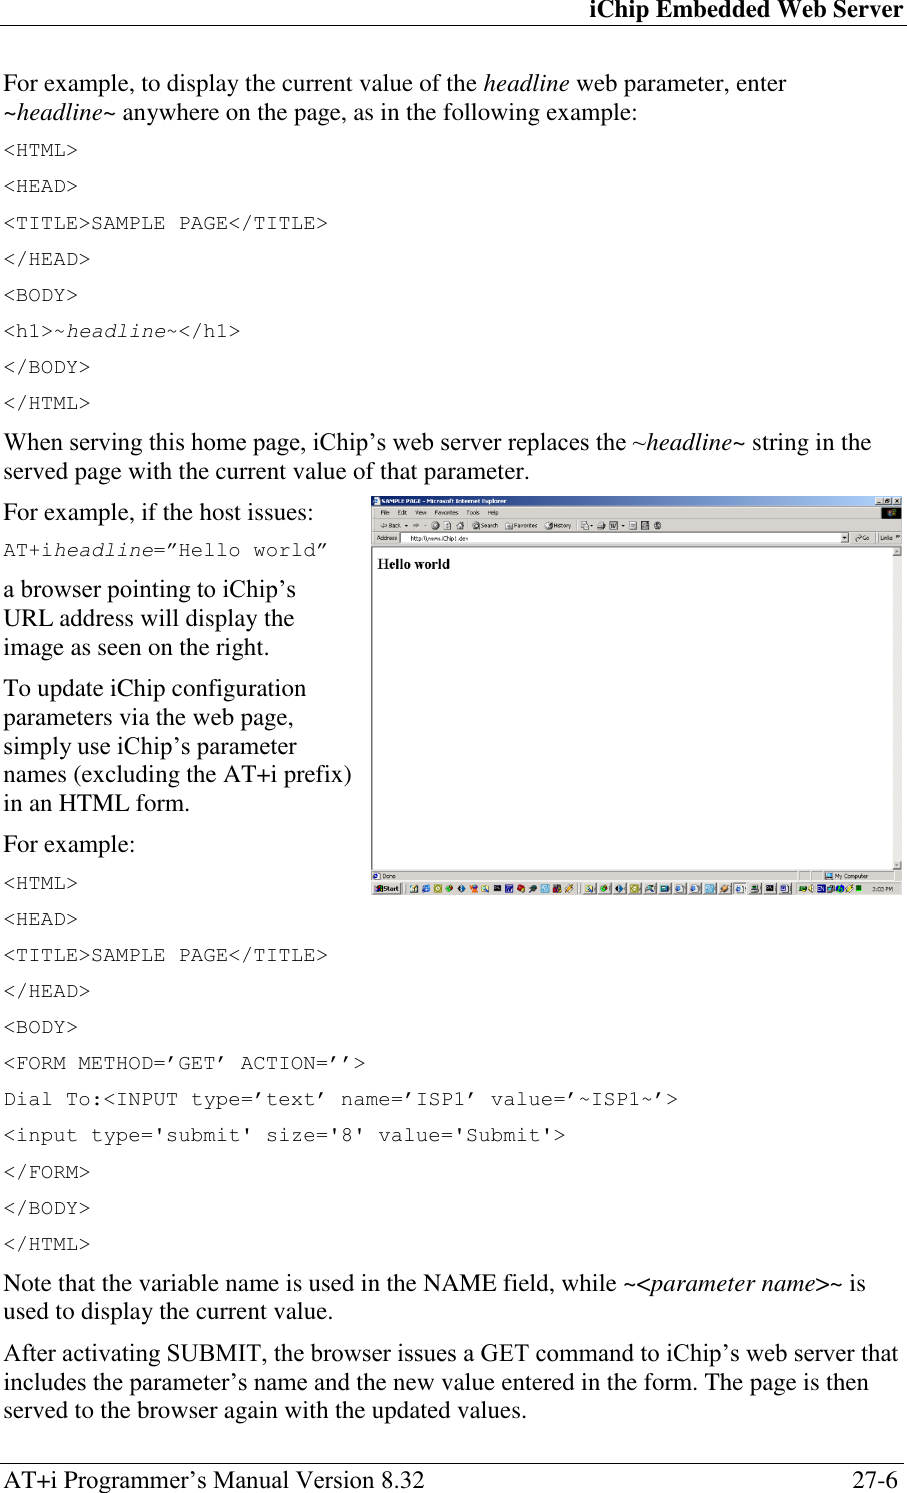 iChip Embedded Web Server AT+i Programmer‘s Manual Version 8.32  27-6 For example, to display the current value of the headline web parameter, enter ~headline~ anywhere on the page, as in the following example: &lt;HTML&gt; &lt;HEAD&gt; &lt;TITLE&gt;SAMPLE PAGE&lt;/TITLE&gt; &lt;/HEAD&gt; &lt;BODY&gt; &lt;h1&gt;~headline~&lt;/h1&gt; &lt;/BODY&gt; &lt;/HTML&gt; When serving this home page, iChip‘s web server replaces the ~headline~ string in the served page with the current value of that parameter. For example, if the host issues: AT+iheadline=”Hello world” a browser pointing to iChip‘s URL address will display the image as seen on the right. To update iChip configuration parameters via the web page, simply use iChip‘s parameter names (excluding the AT+i prefix) in an HTML form. For example: &lt;HTML&gt; &lt;HEAD&gt; &lt;TITLE&gt;SAMPLE PAGE&lt;/TITLE&gt; &lt;/HEAD&gt; &lt;BODY&gt; &lt;FORM METHOD=’GET’ ACTION=’’&gt; Dial To:&lt;INPUT type=’text’ name=’ISP1’ value=’~ISP1~’&gt; &lt;input type=&apos;submit&apos; size=&apos;8&apos; value=&apos;Submit&apos;&gt; &lt;/FORM&gt; &lt;/BODY&gt; &lt;/HTML&gt; Note that the variable name is used in the NAME field, while ~&lt;parameter name&gt;~ is used to display the current value. After activating SUBMIT, the browser issues a GET command to iChip‘s web server that includes the parameter‘s name and the new value entered in the form. The page is then served to the browser again with the updated values. 